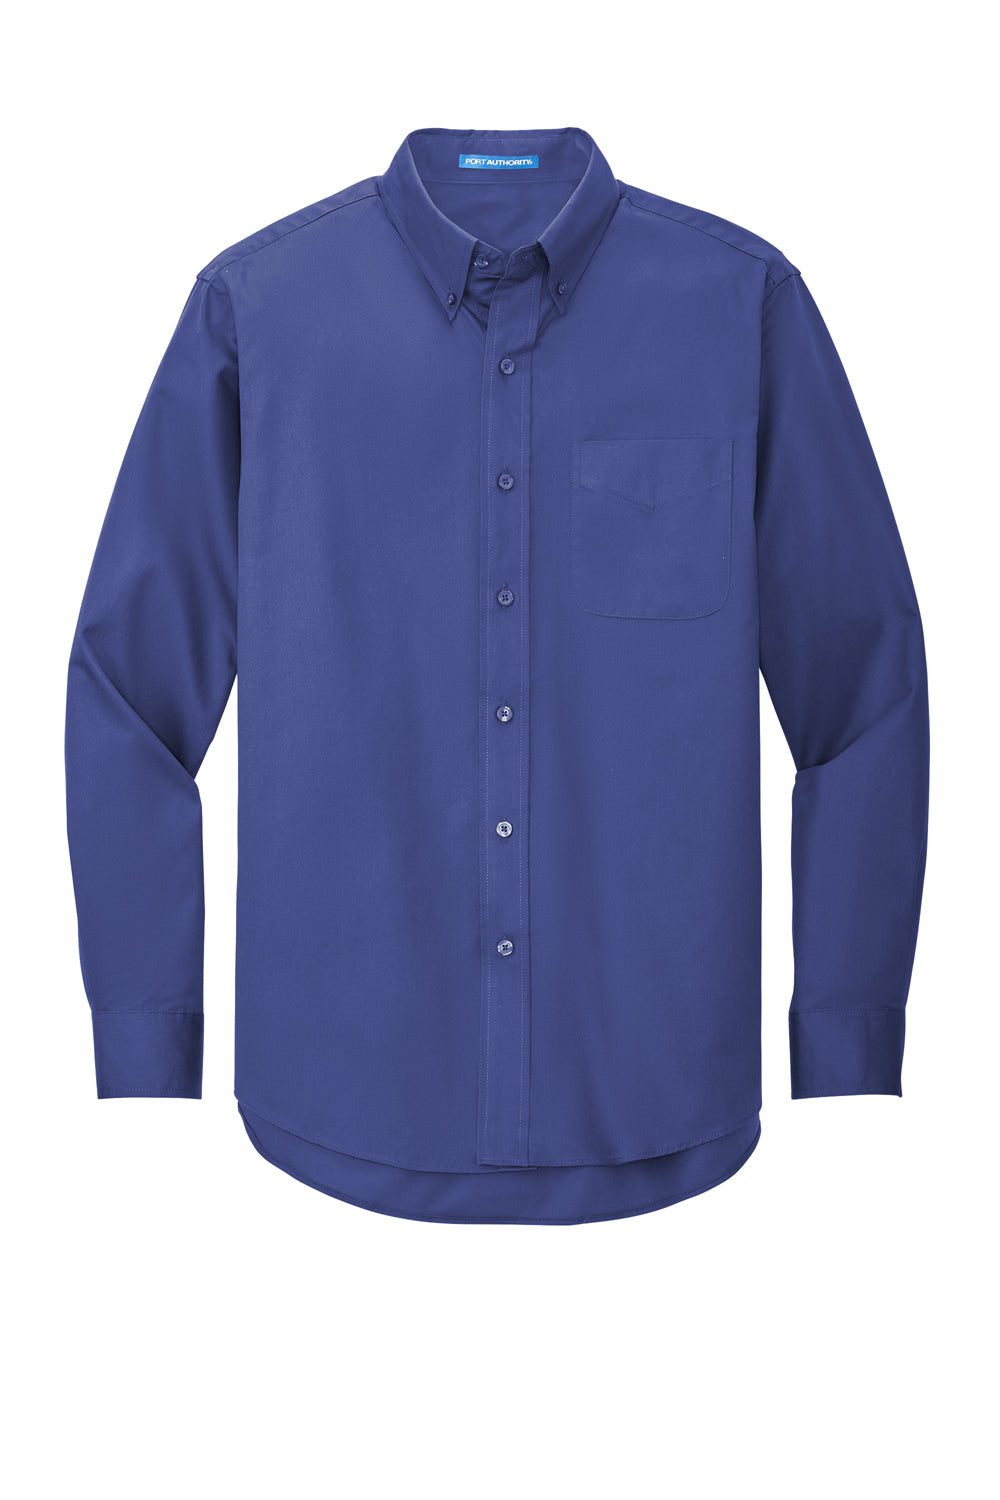 Port Authority S608/TLS608/S608ES Mens Easy Care Wrinkle Resistant Long Sleeve Button Down Shirt w/ Pocket Mediterranean Blue Flat Front